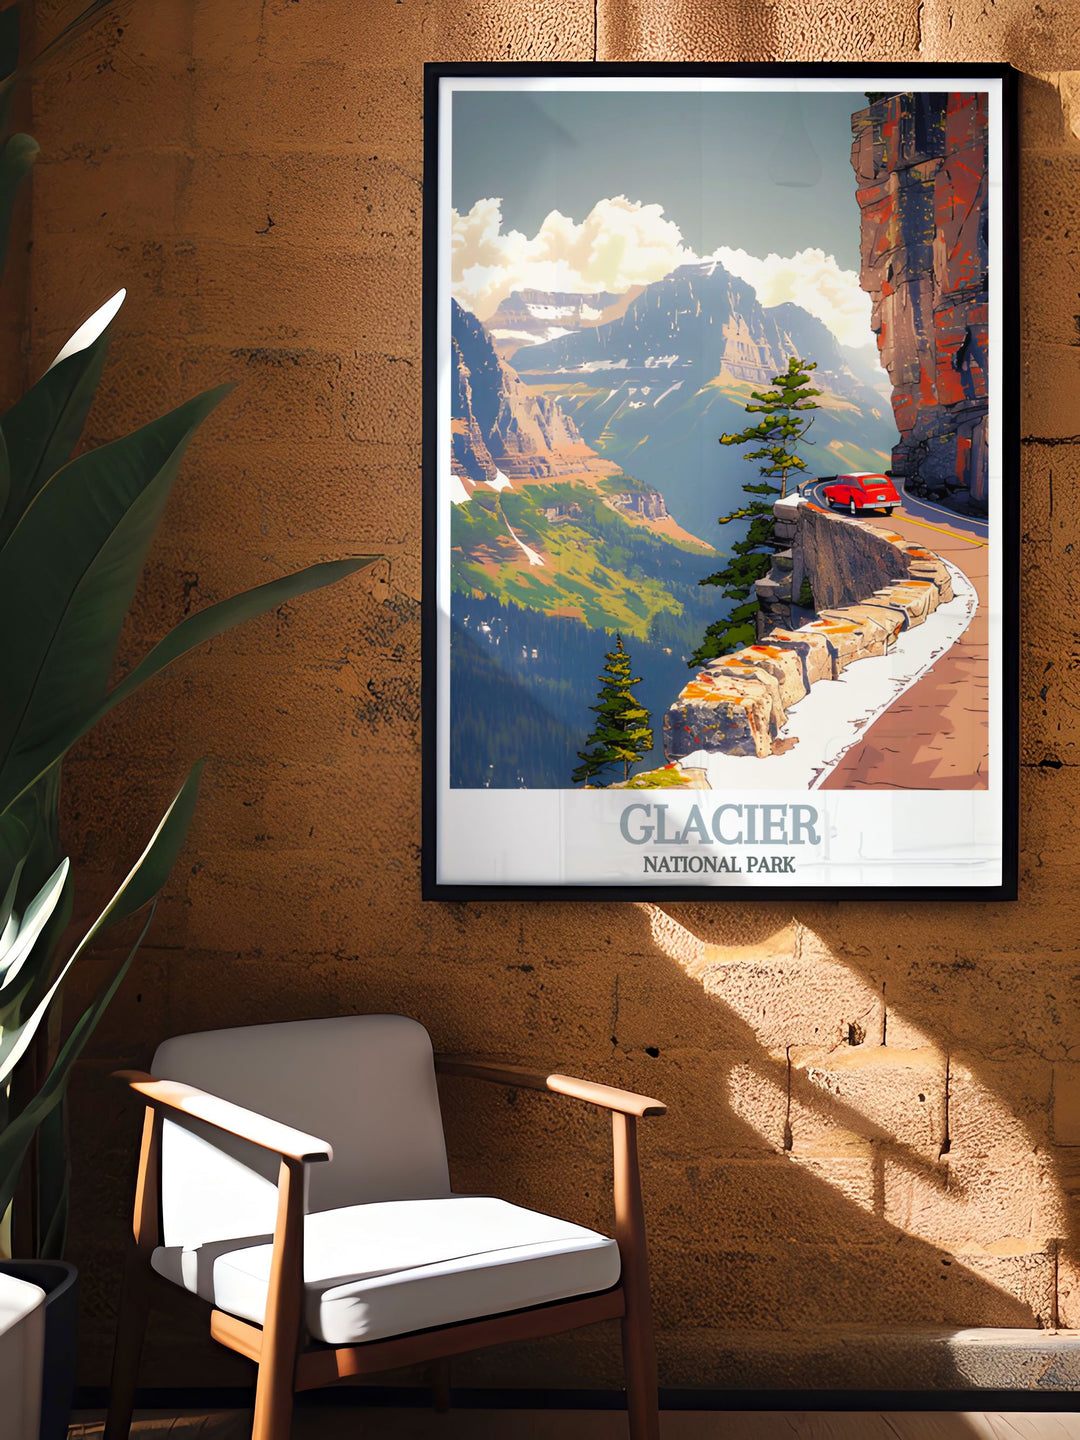 Framed art illustrating the natural splendor of Glacier National Park, with its towering peaks, serene lakes, and abundant wildlife, reflecting the majestic landscapes of Montana.